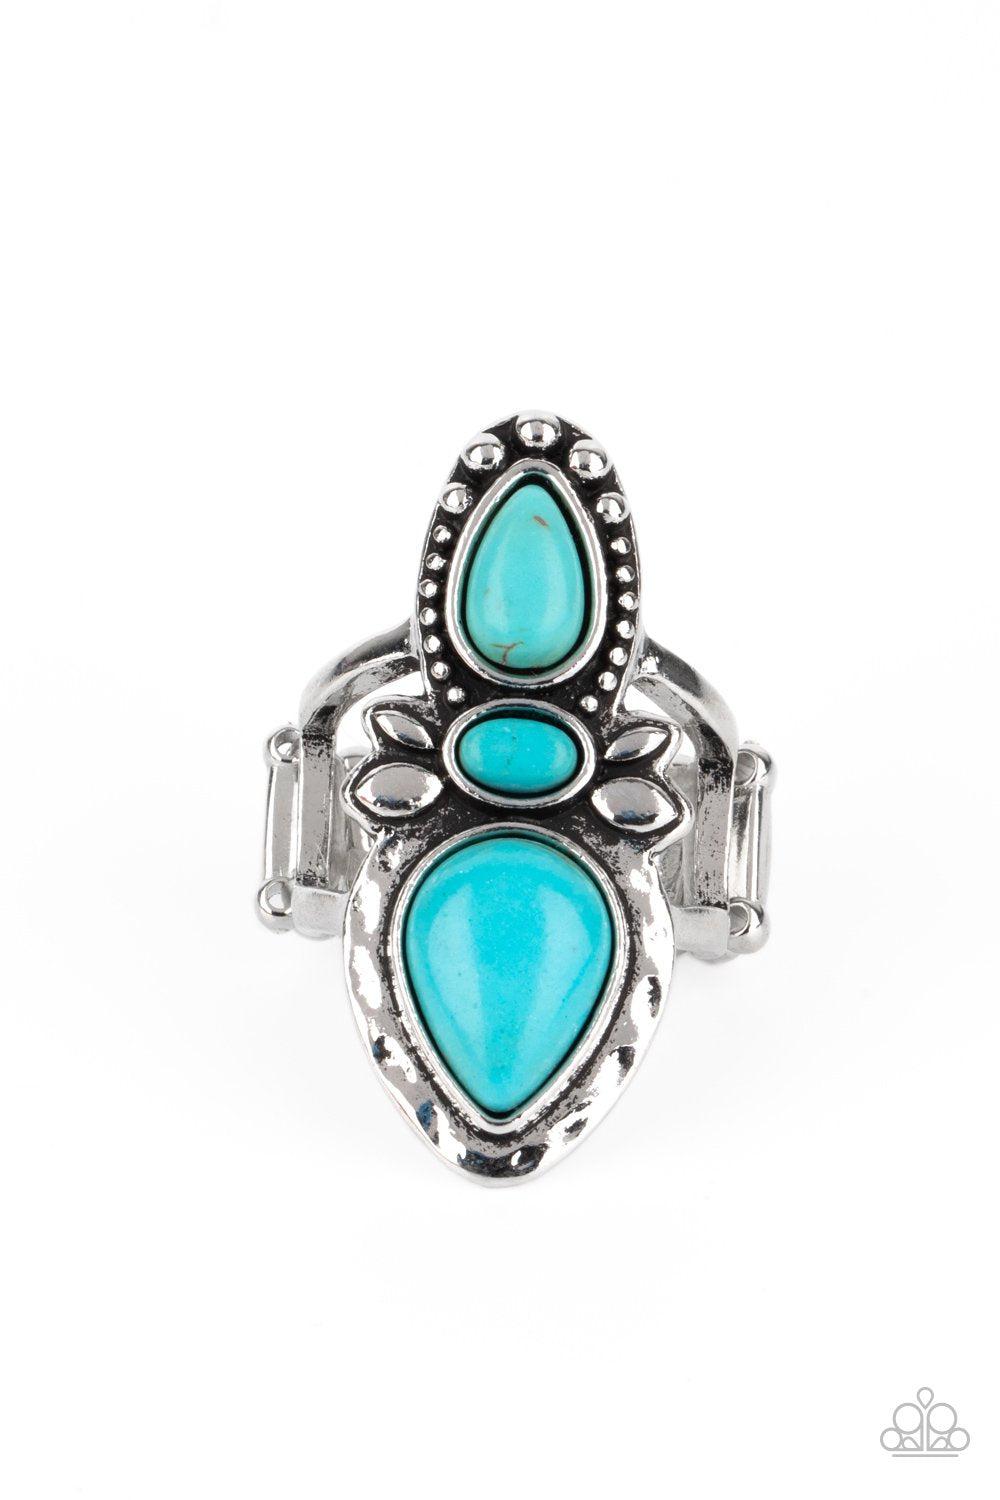 In a BADLANDS Mood Turquoise Blue Stone Ring - Paparazzi Accessories- lightbox - CarasShop.com - $5 Jewelry by Cara Jewels